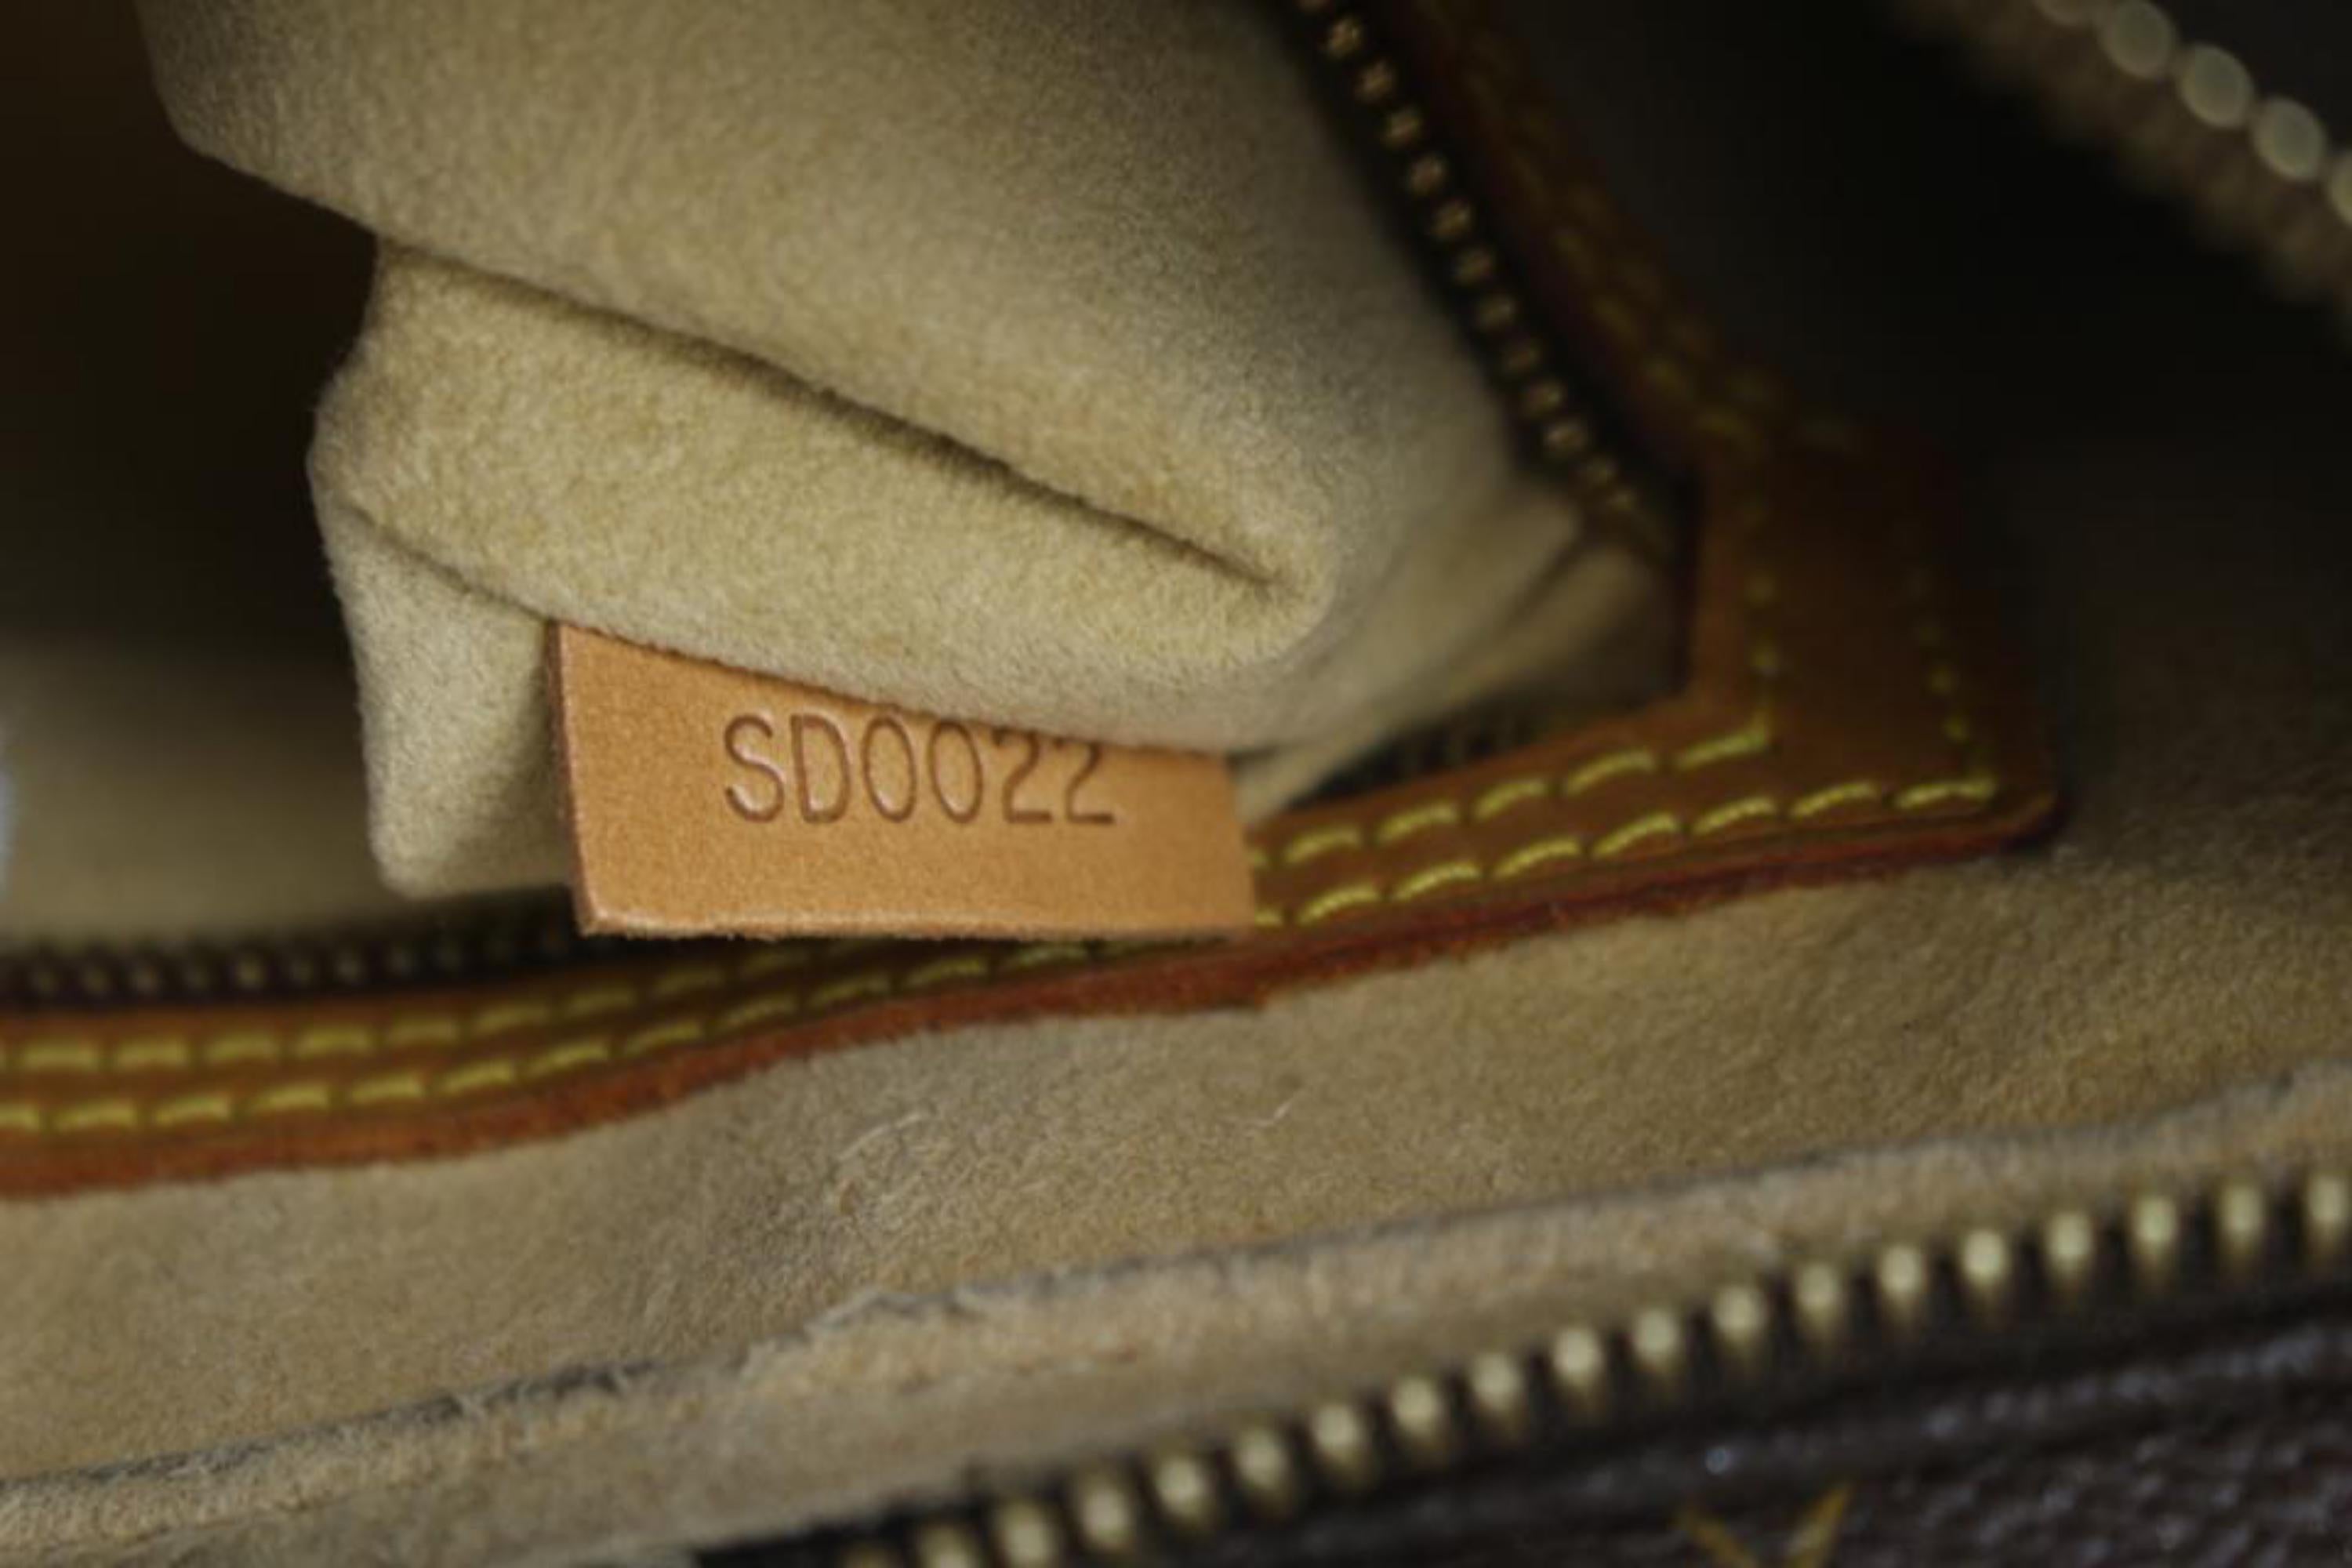 Louis Vuitton Looping Monogram Mm 6lz0625 Brown Coated Canvas Shoulder Bag In Good Condition For Sale In Forest Hills, NY